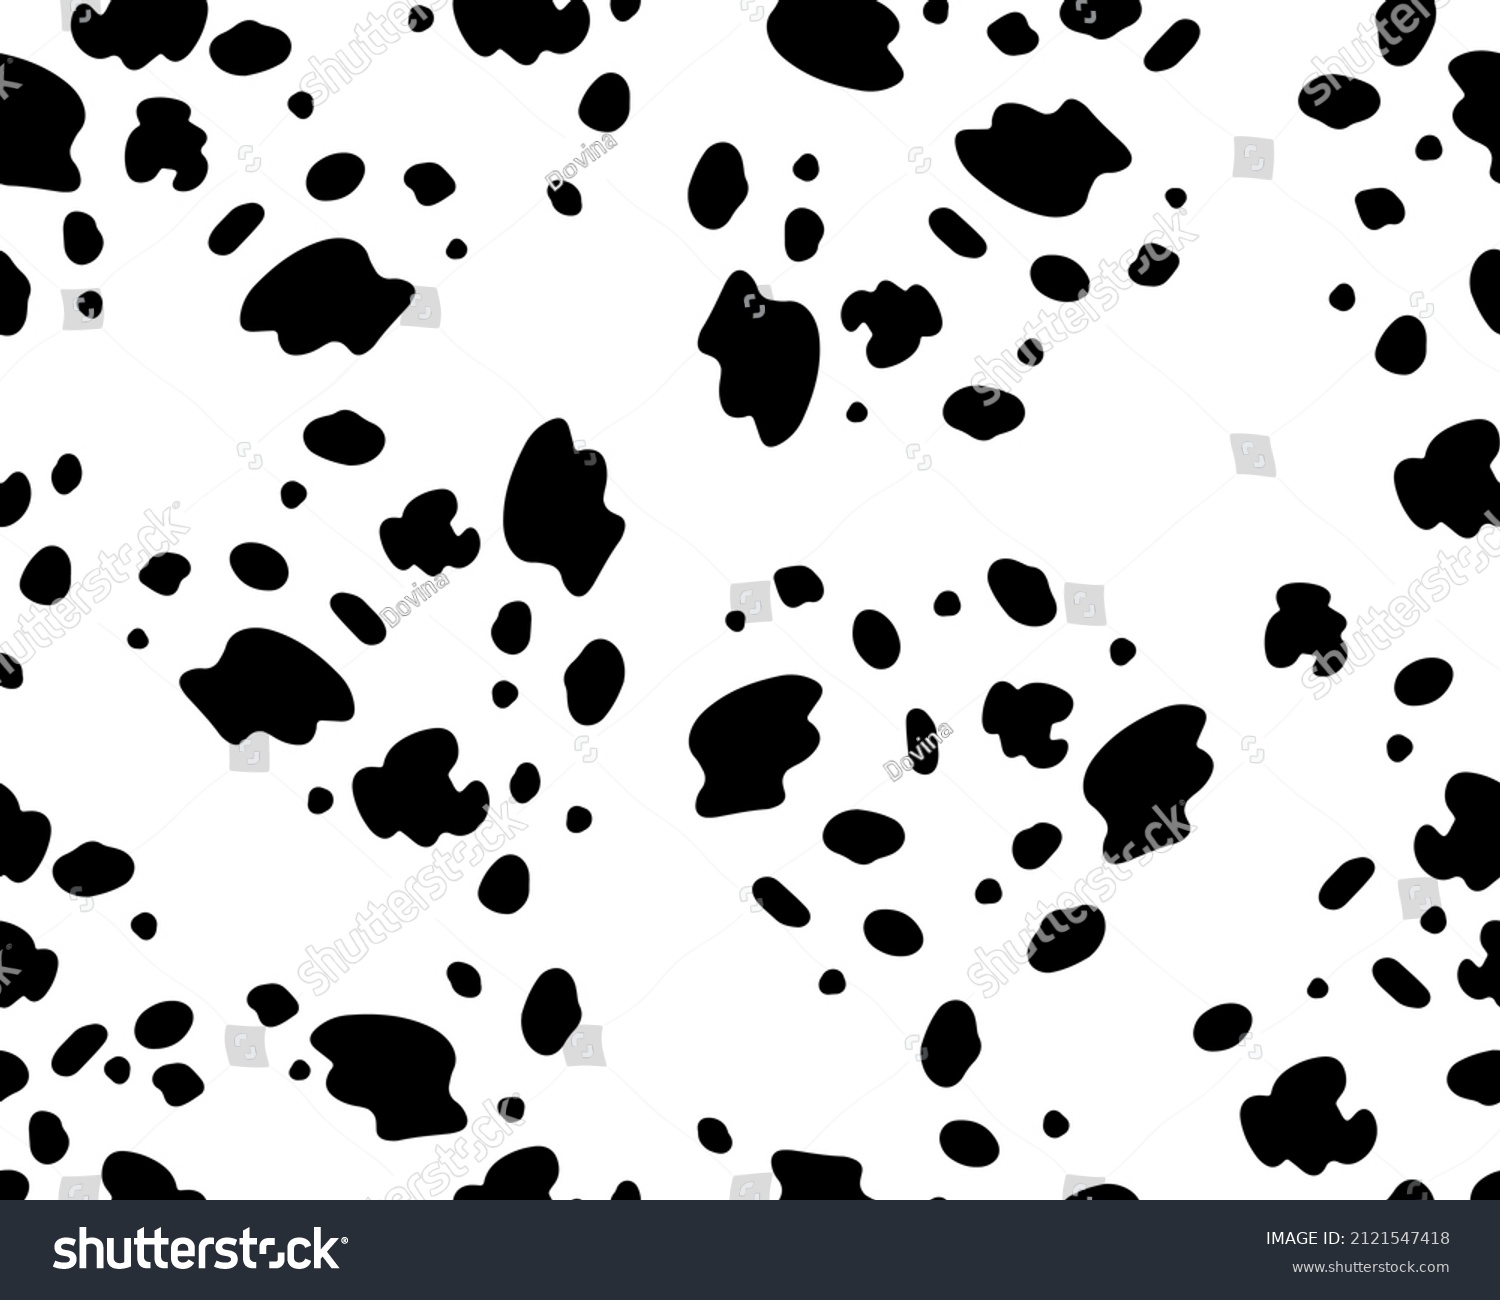 SVG of Dalmatian pattern seamless pattern on a white isolated background. Black uneven spots animal print. Vector background svg